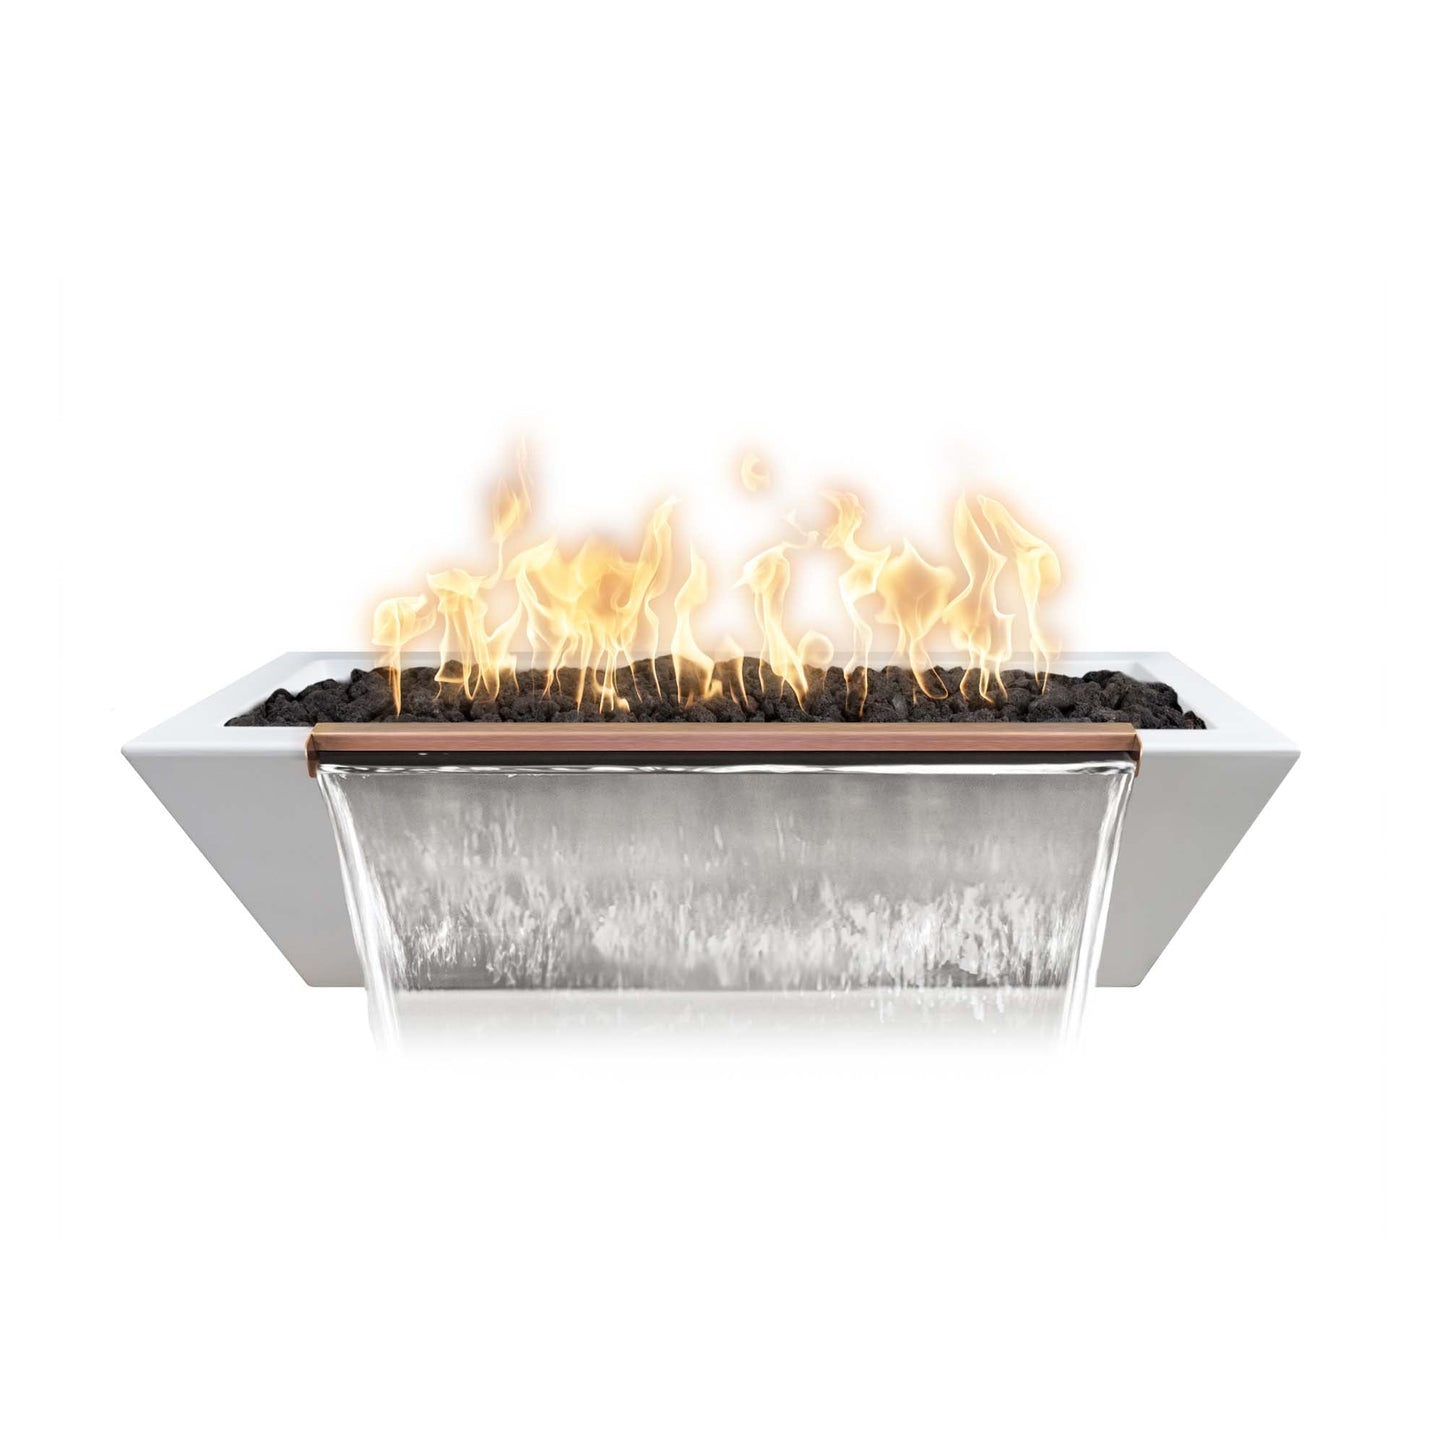 The Outdoor Plus Linear Maya 72" Rustic Gray GFRC Concrete Liquid Propane Fire & Water Bowl with 12V Electronic Ignition